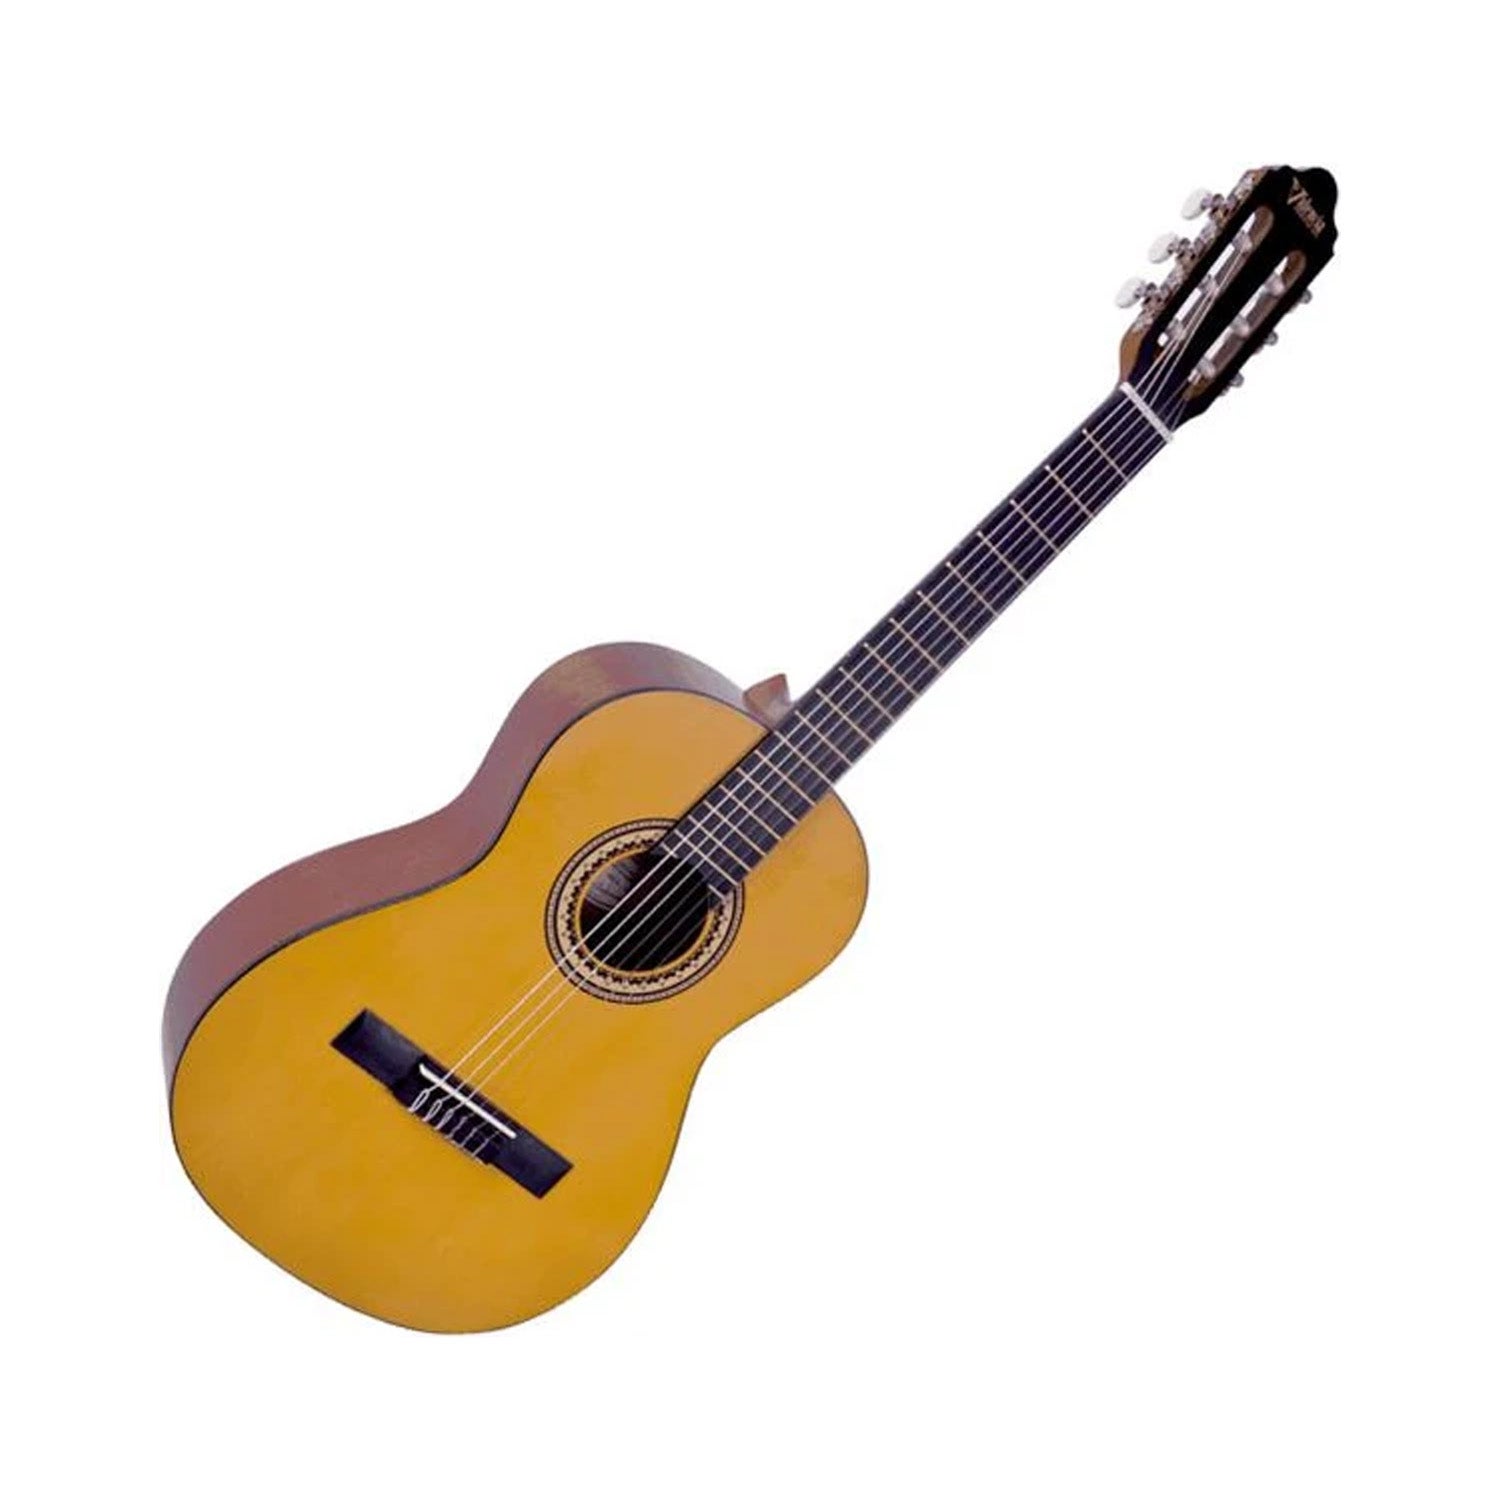 https://www.musicworks.co.nz/content/products/valencia-vc203-34-size-classical-guitar-nylon-string-natural-satin-finish-1-gccvc203.jpg?canvas=1:1&width=2500